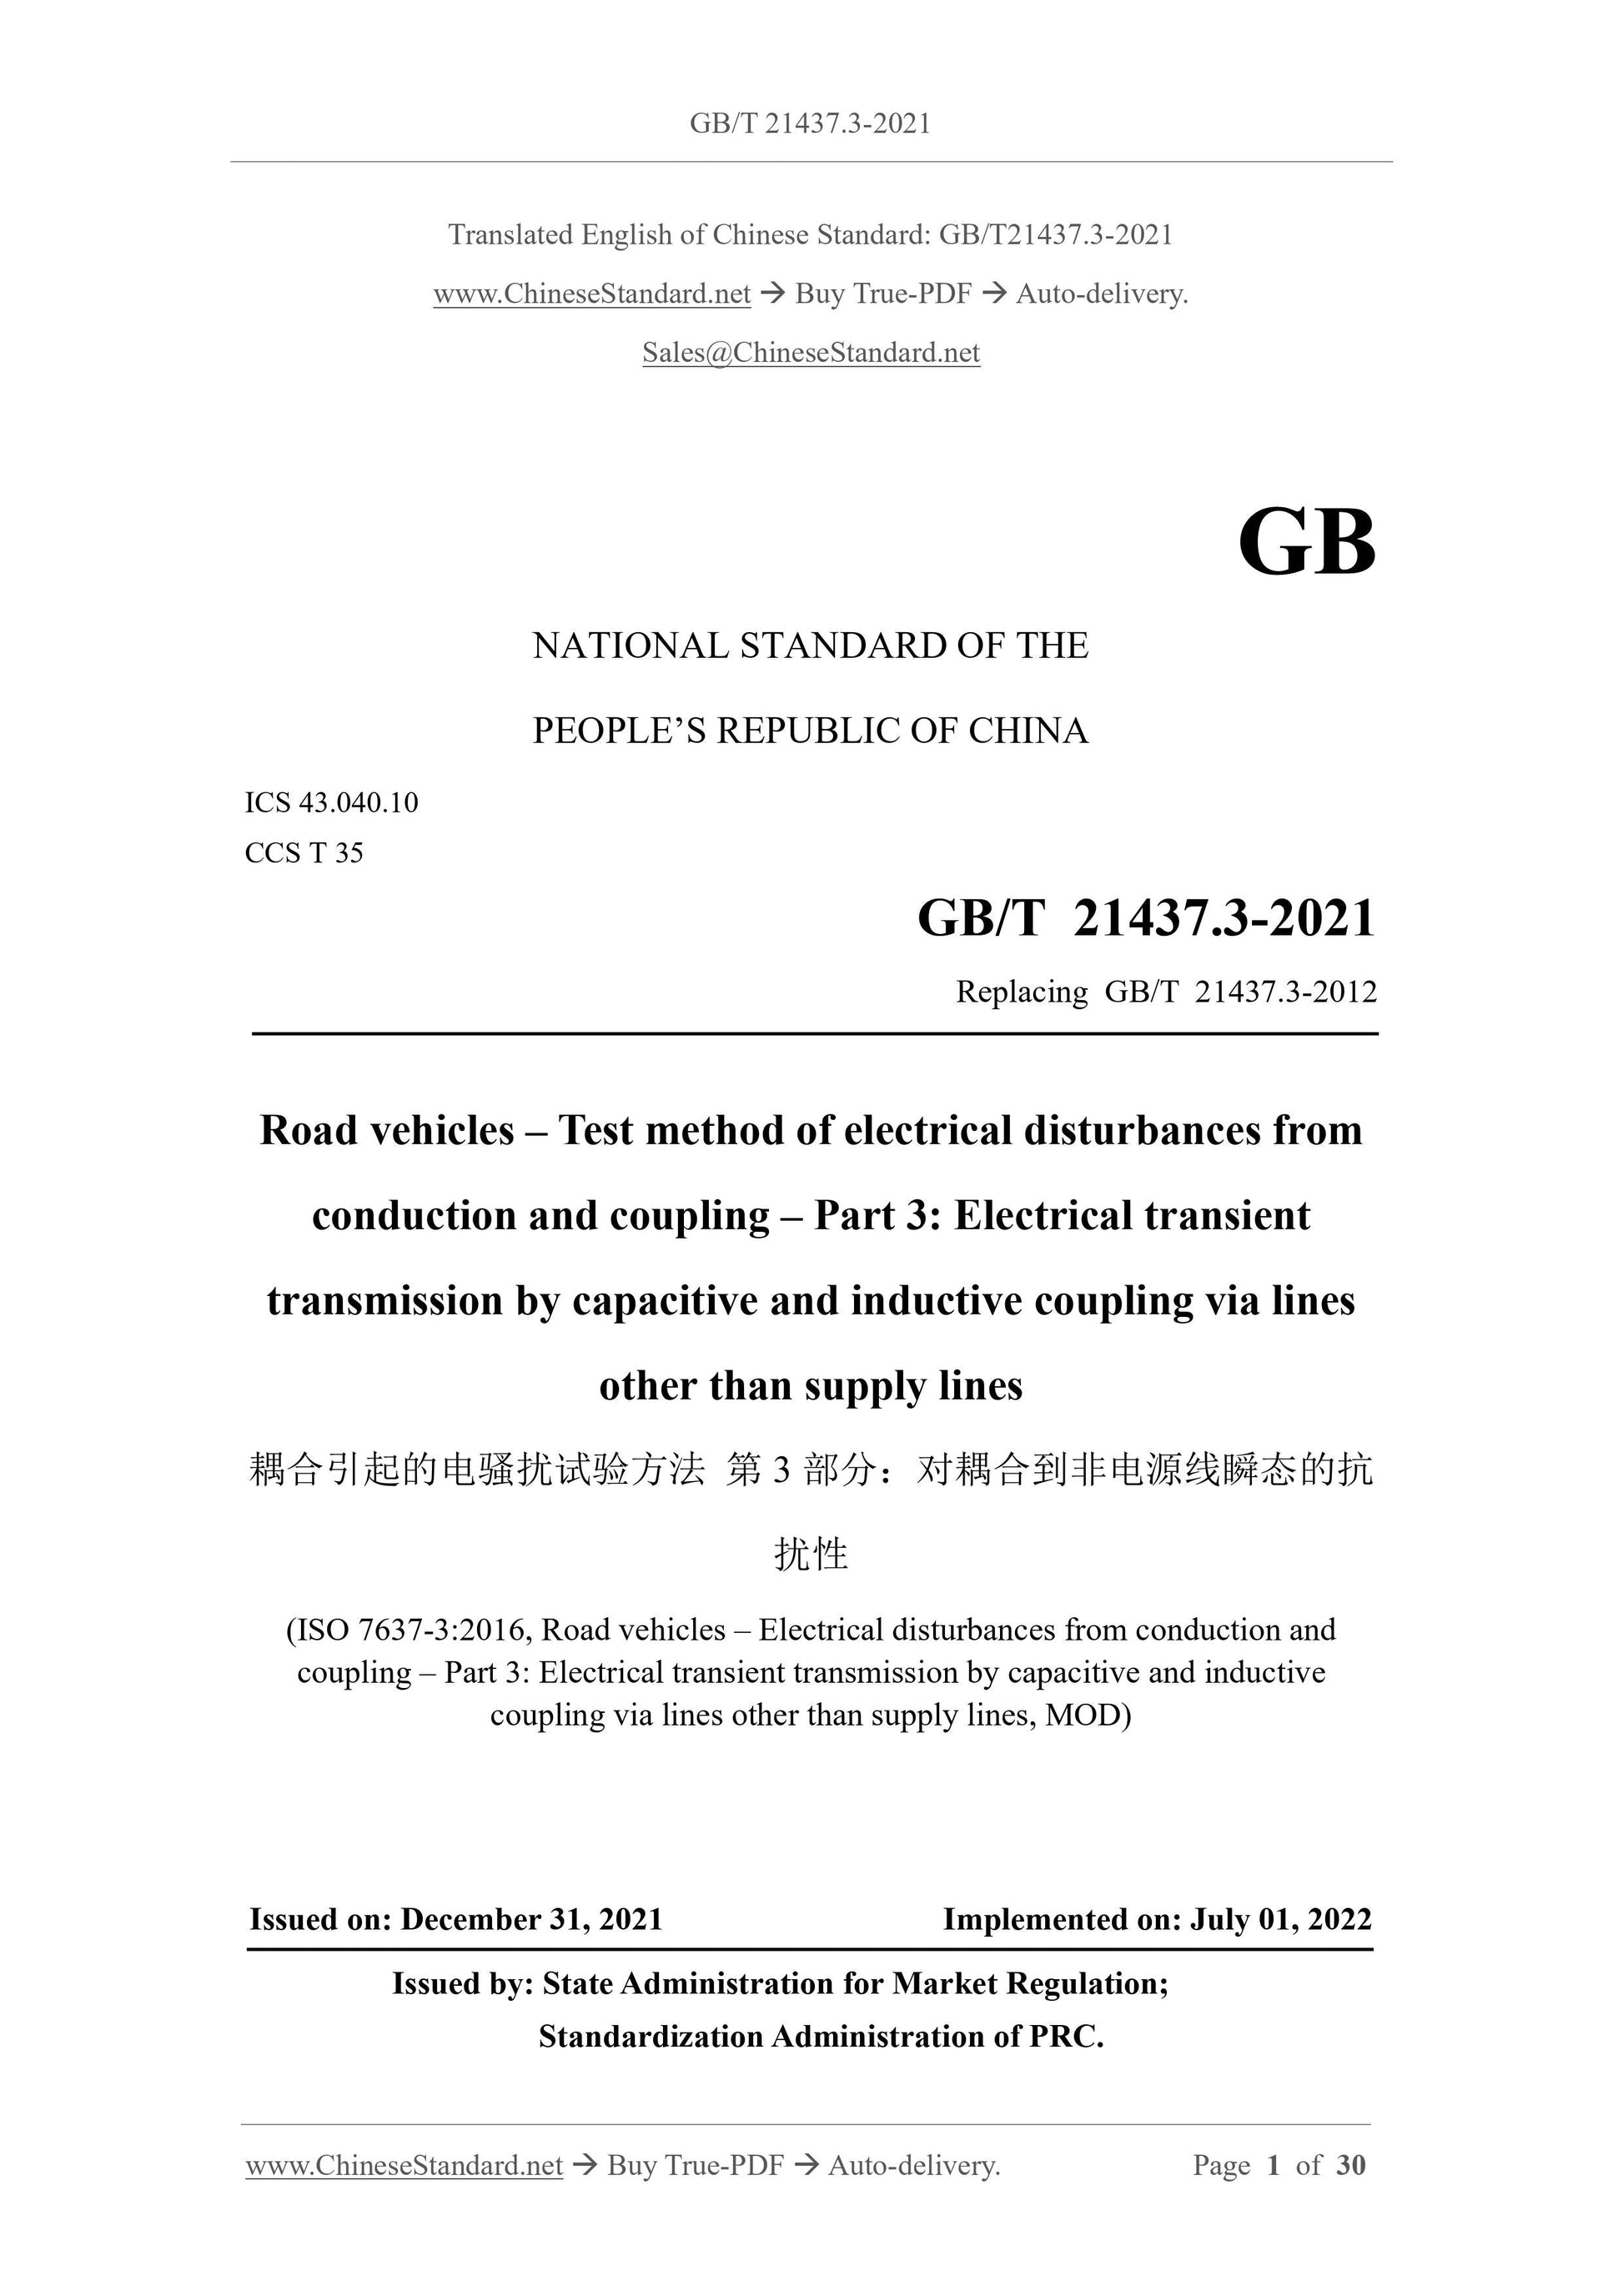 GB/T 21437.3-2021 Page 1